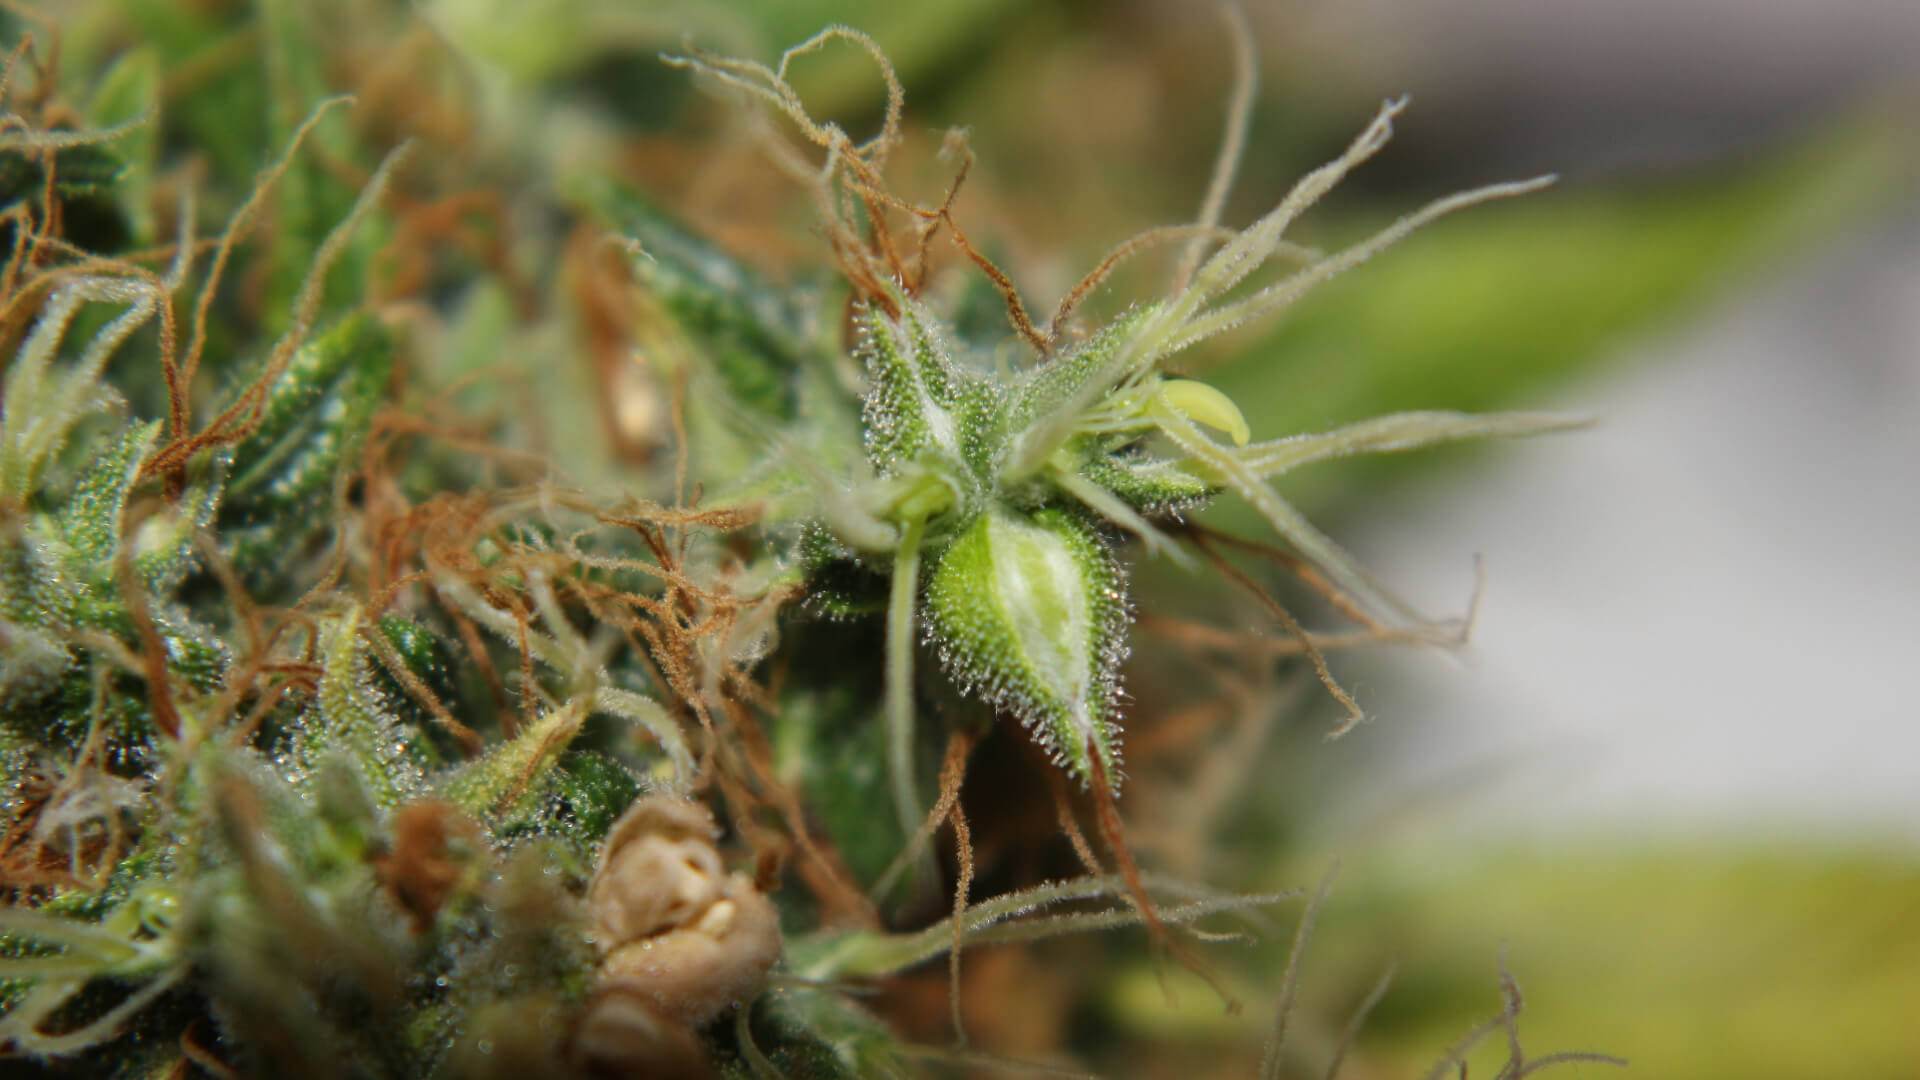 macro shot of green cannabis calyxes protruding yellow, banana shaped spears out of a green cannabis bud